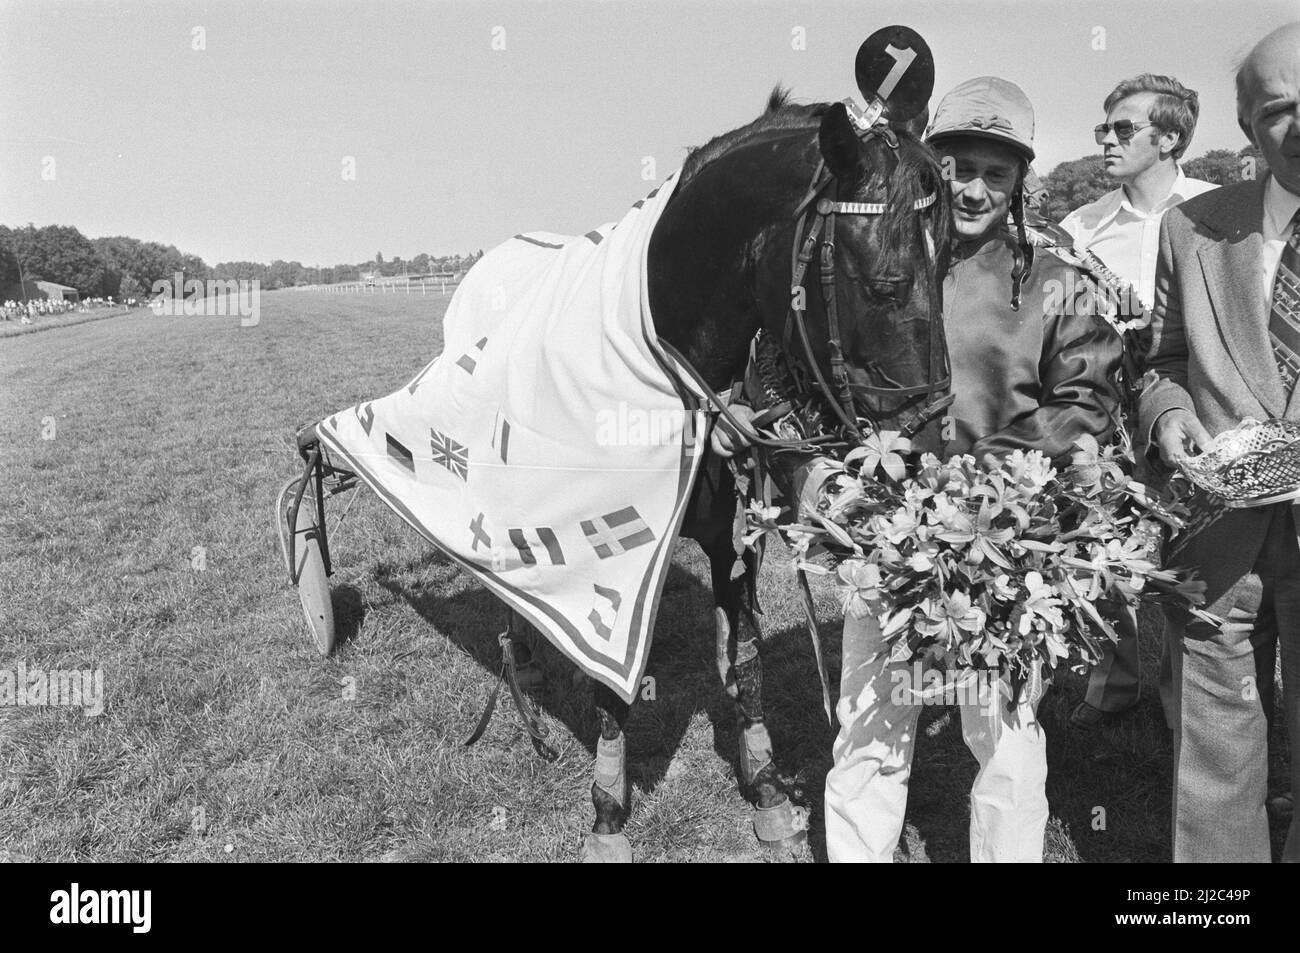 European Championships for five-year-olds at Duindigt, winner Faro ridden by Essartial, after the finish ca. 12 June 1976 Stock Photo